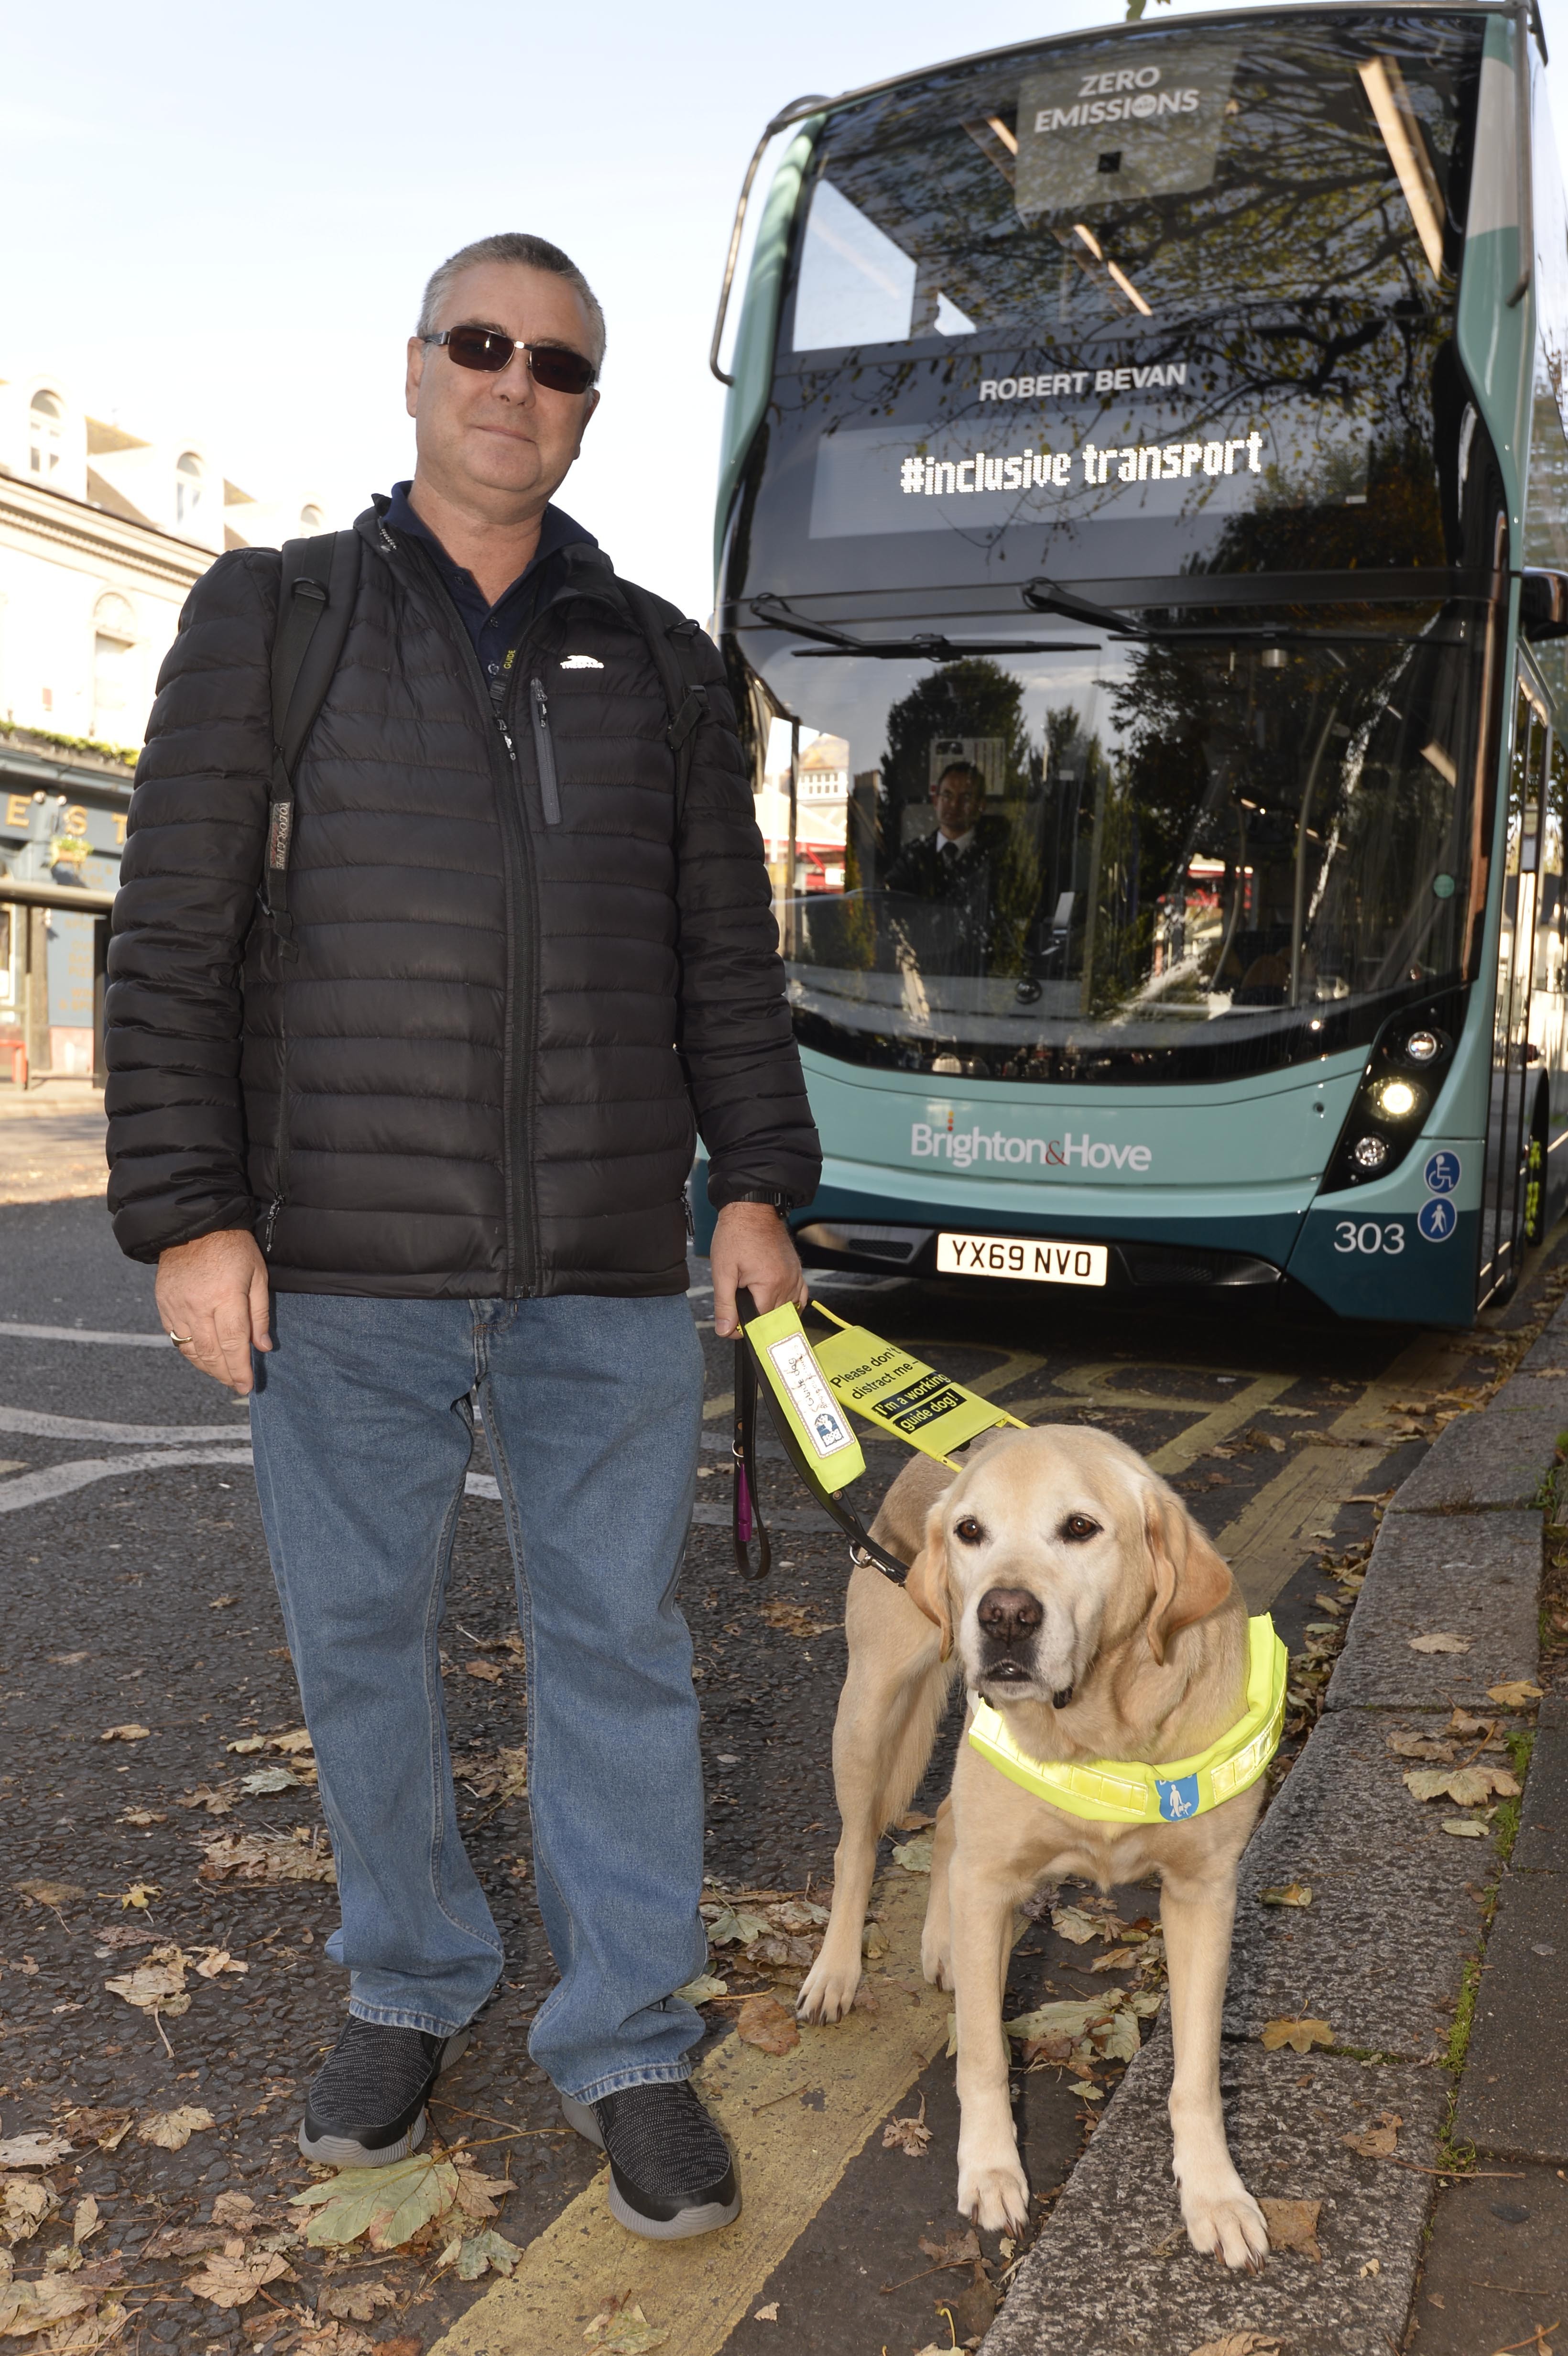 Man with guide dog stood in front of a bus